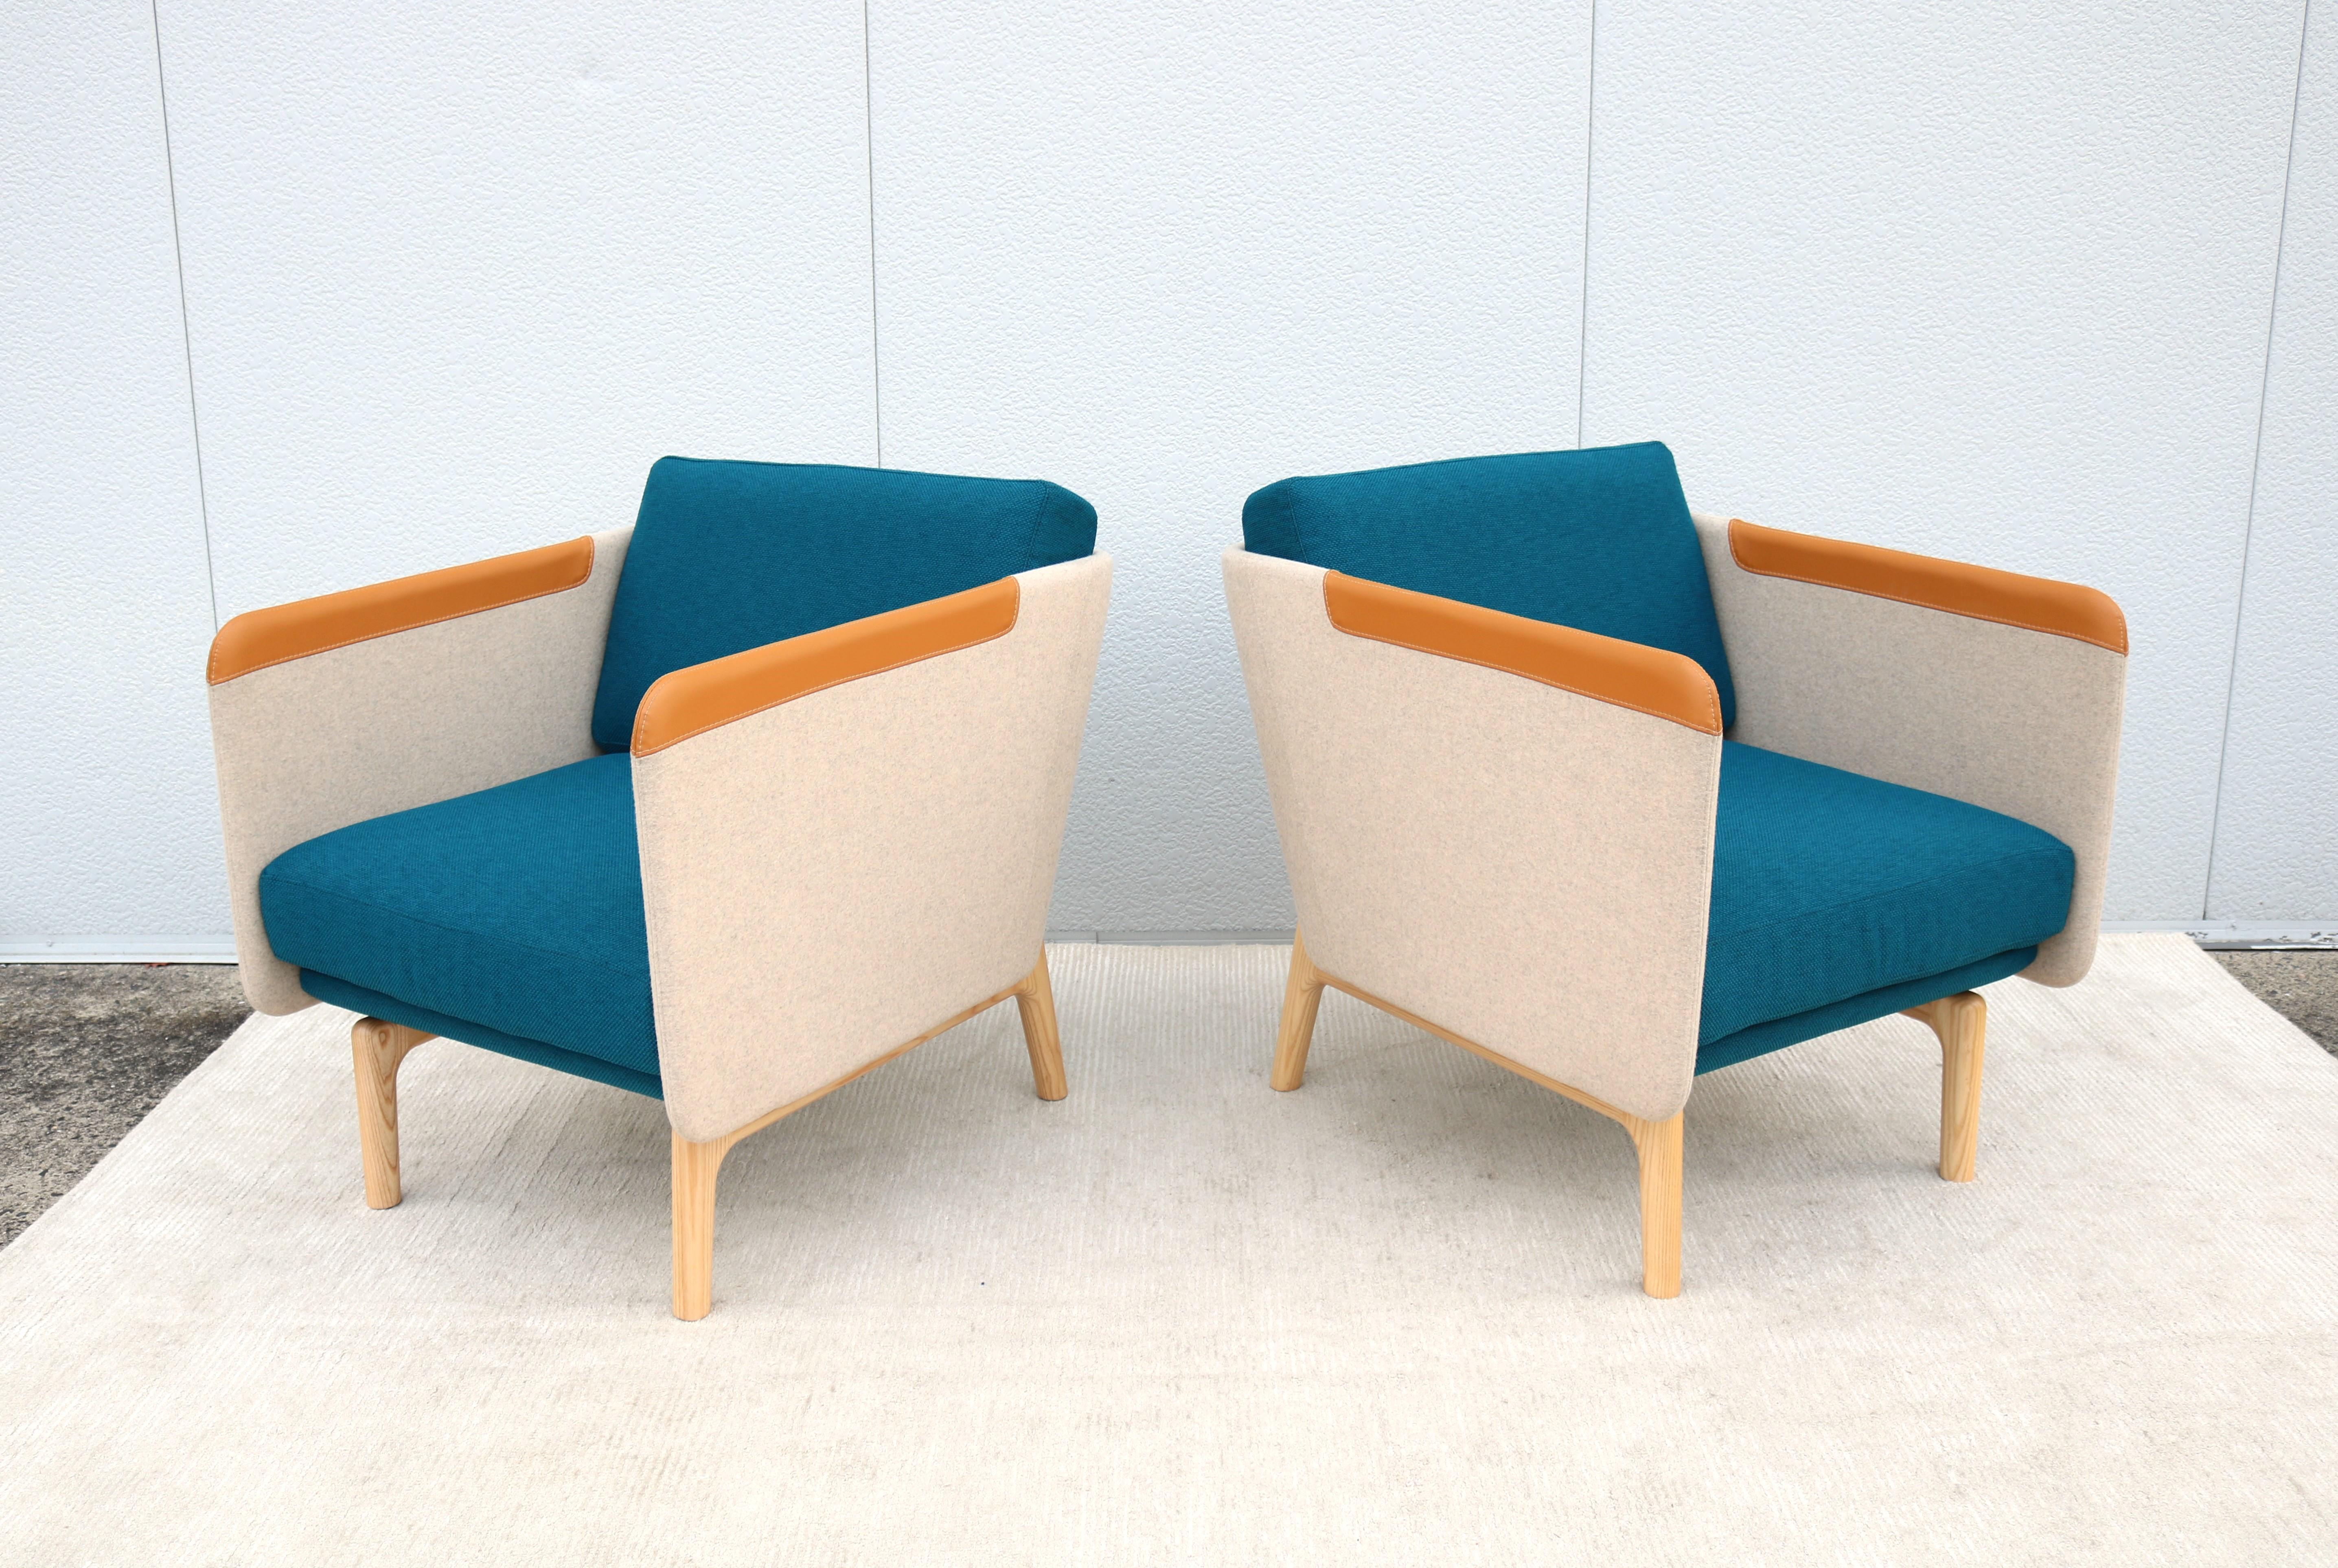 Contemporary Modern Roger Webb for OFS Heya Wool Lounge Chairs - a Pair For Sale 3